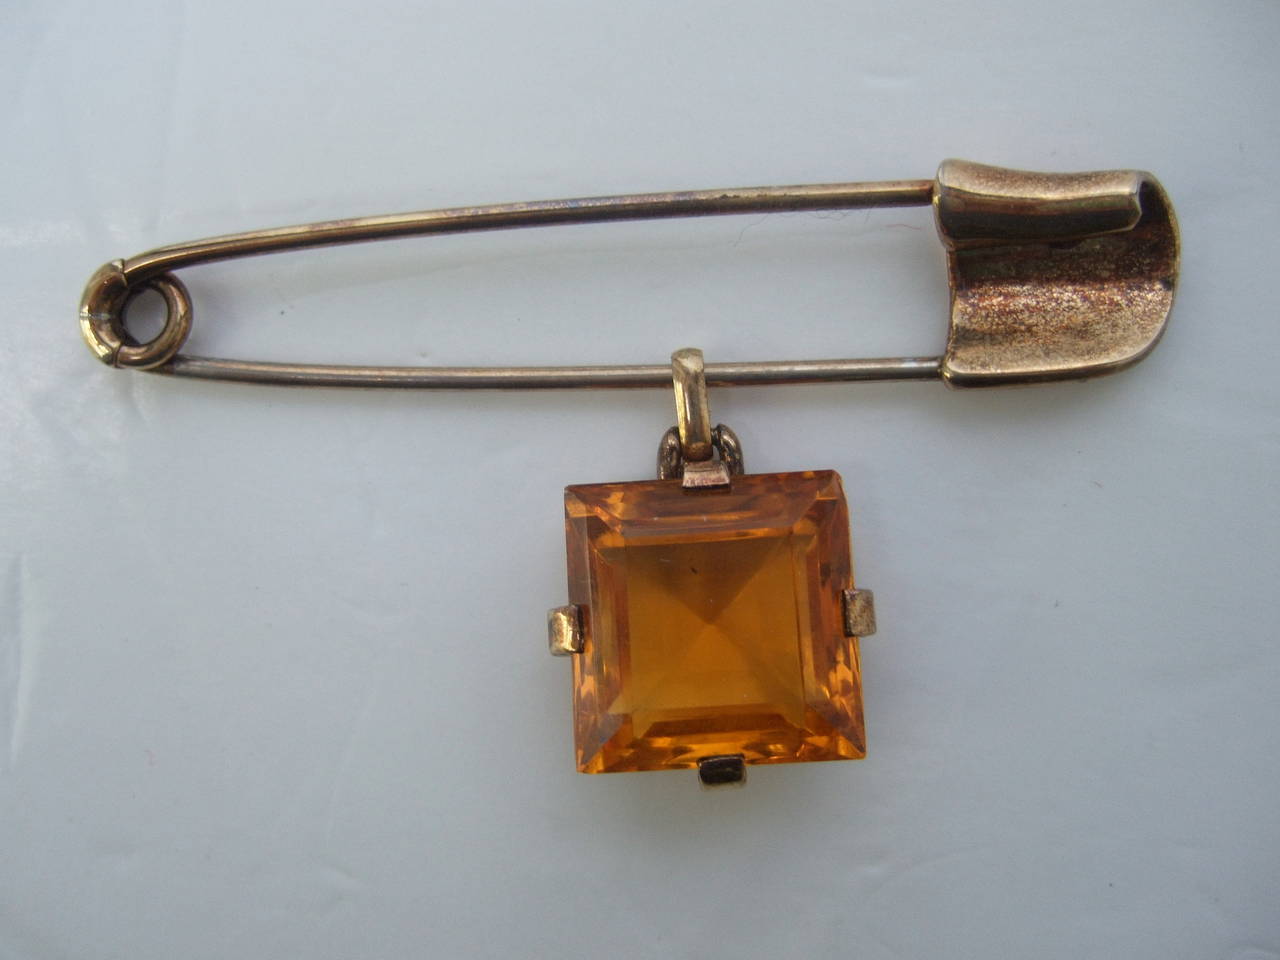 TRIFARI Art Deco unique safety pin brooch c 1950
The avant-garde brooch is designed with an citrine square cut dangling crystal
The large scale brooch is designed in the shape of a safety pin with gilt vermeil

Stamped: Trifari Pat Pend

The